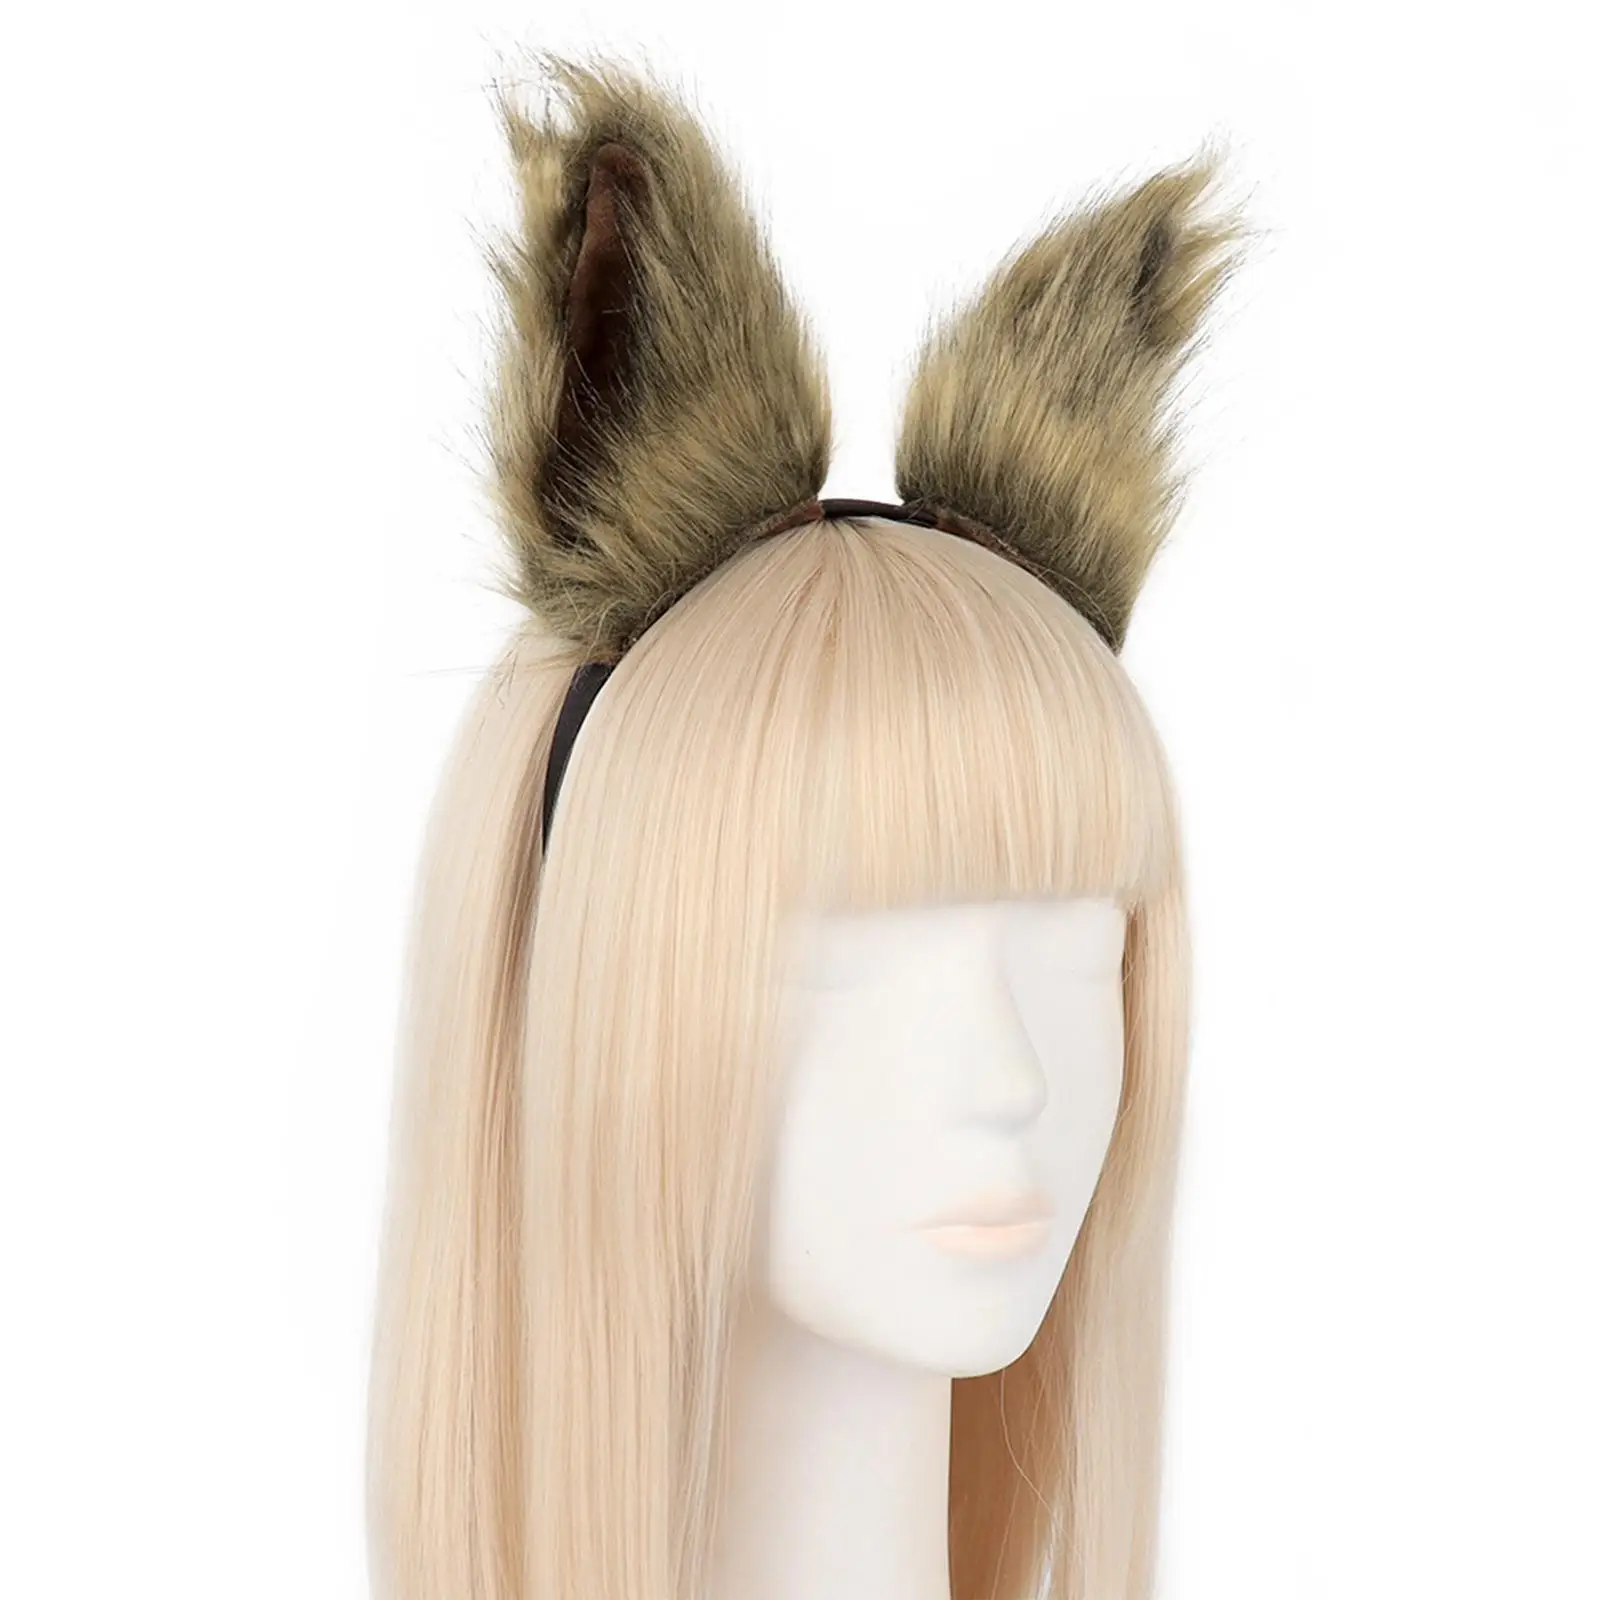 Animals Ears and Tail Set Animals Themed Parties Fancy Dress for Birthday Festival Stage Performance Night Club Party Supplies